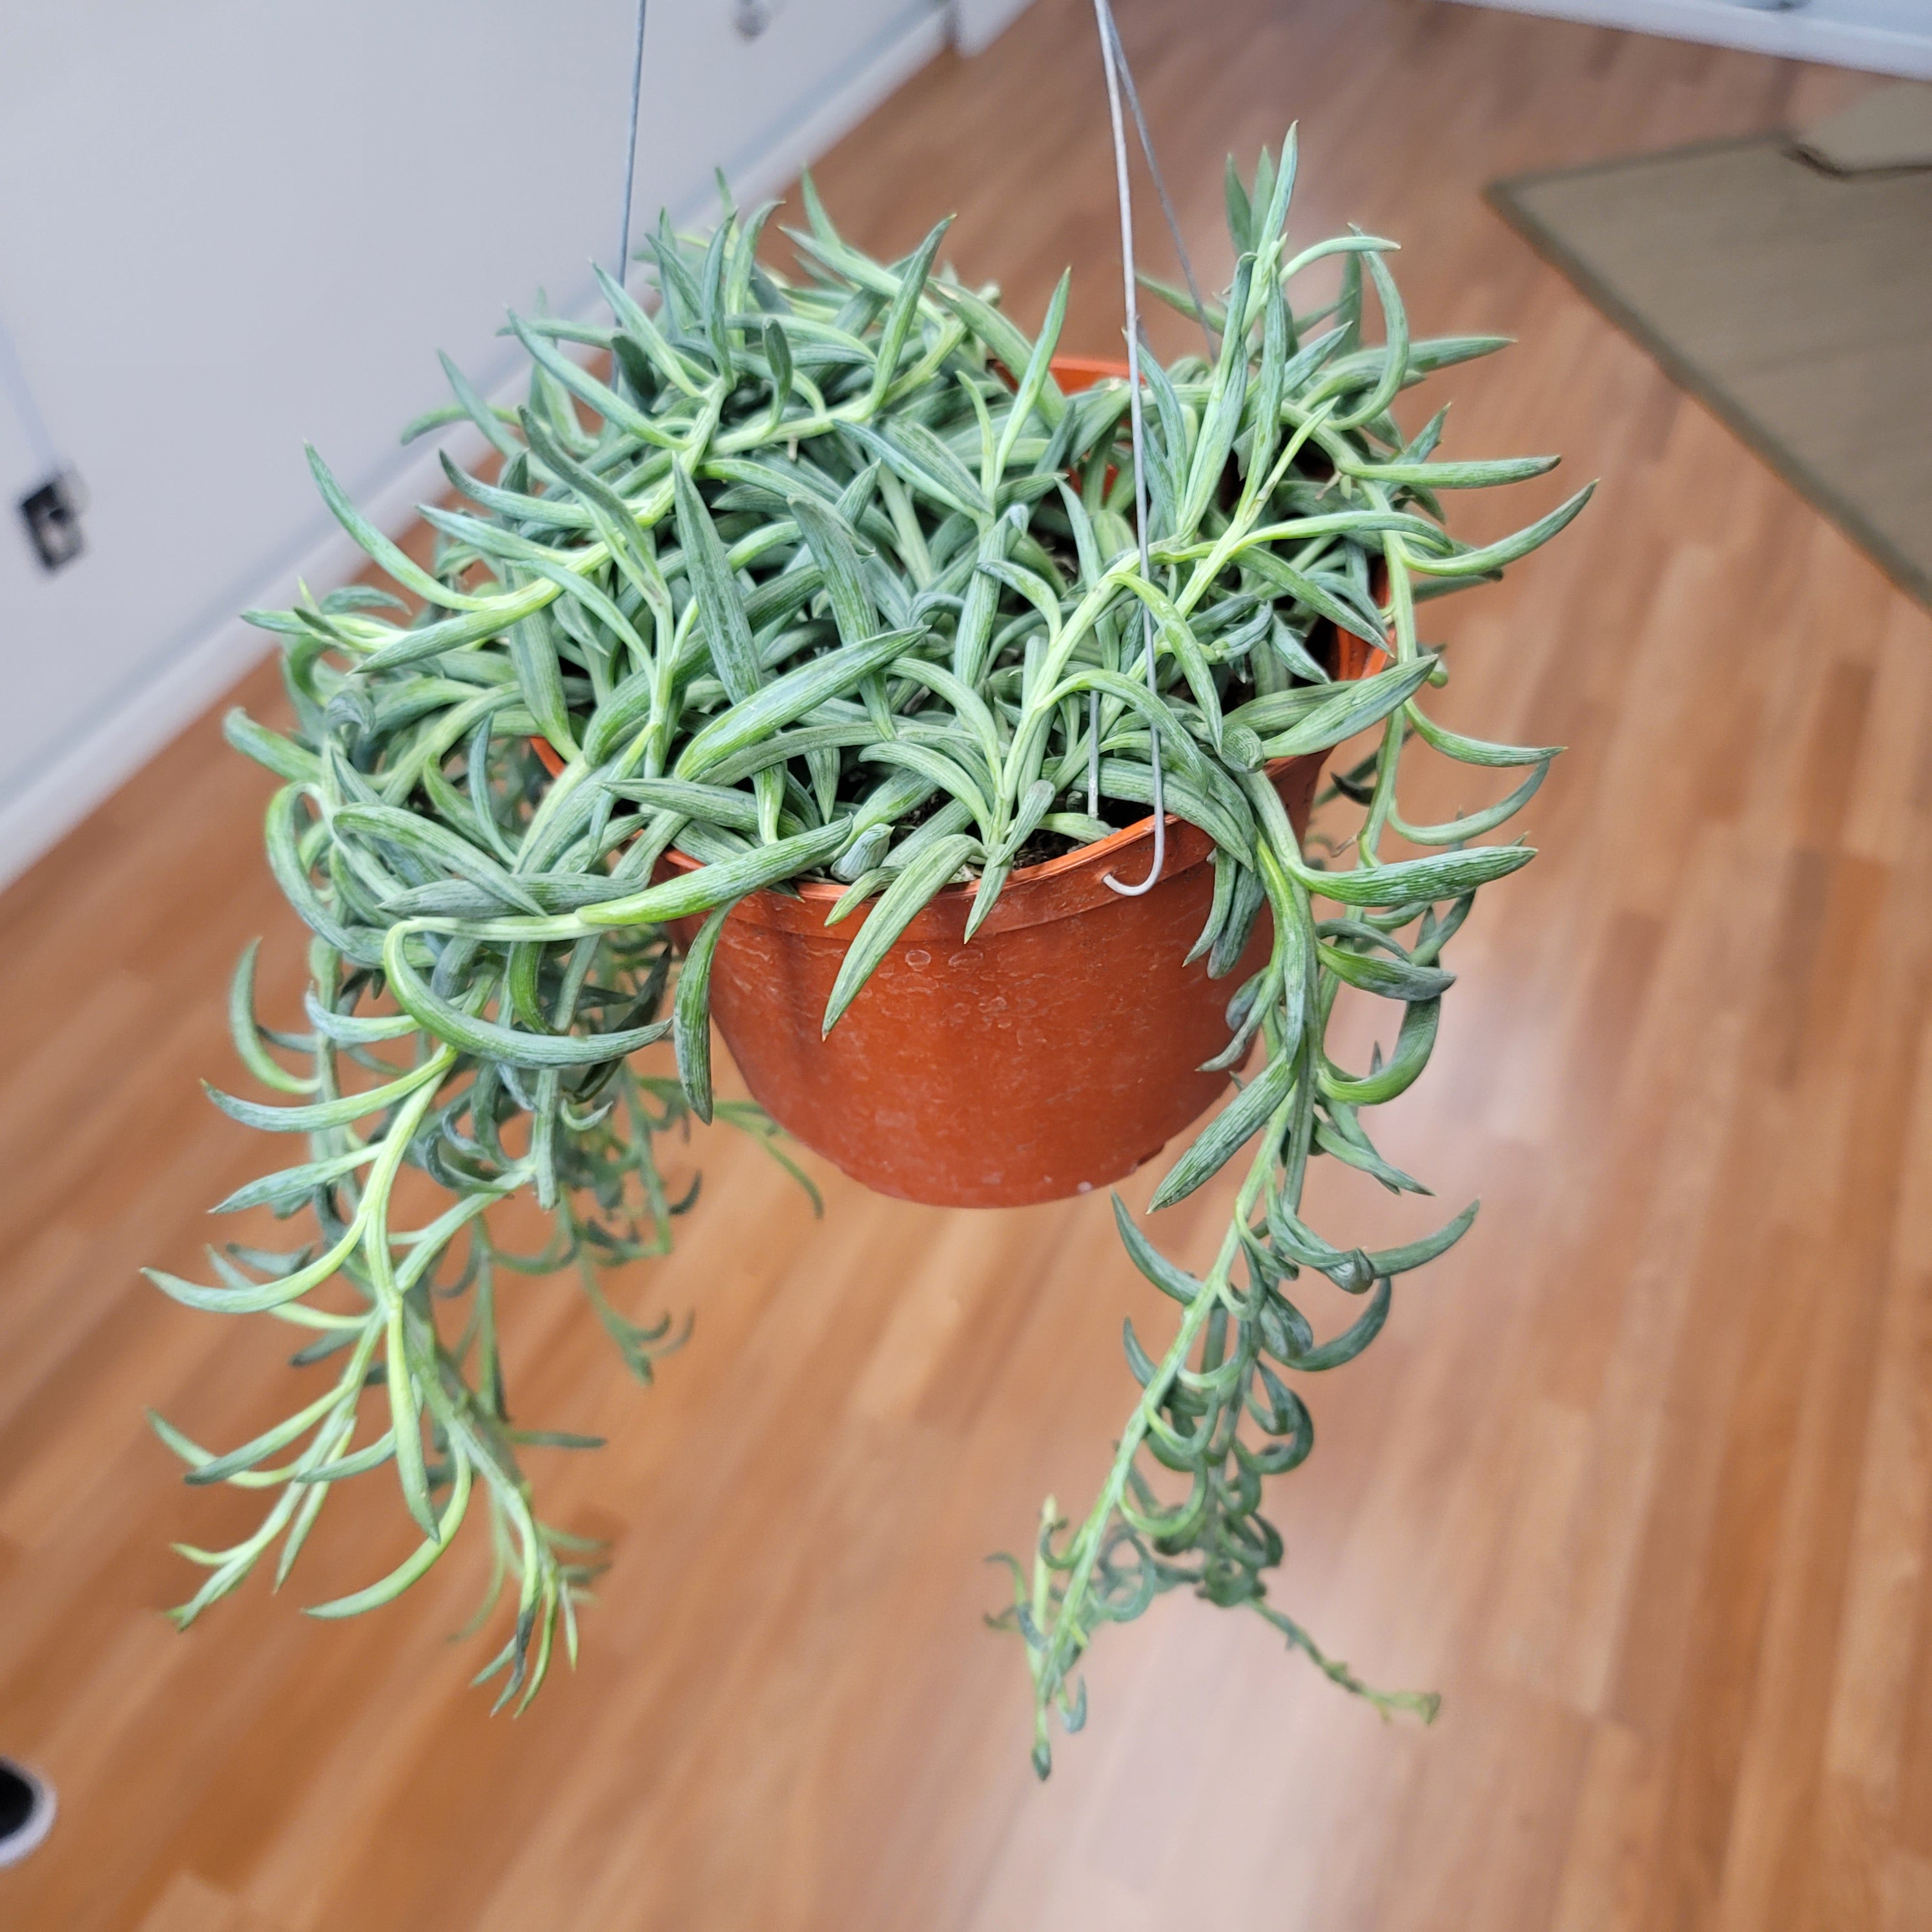 MYSTERY HANGING PLANT